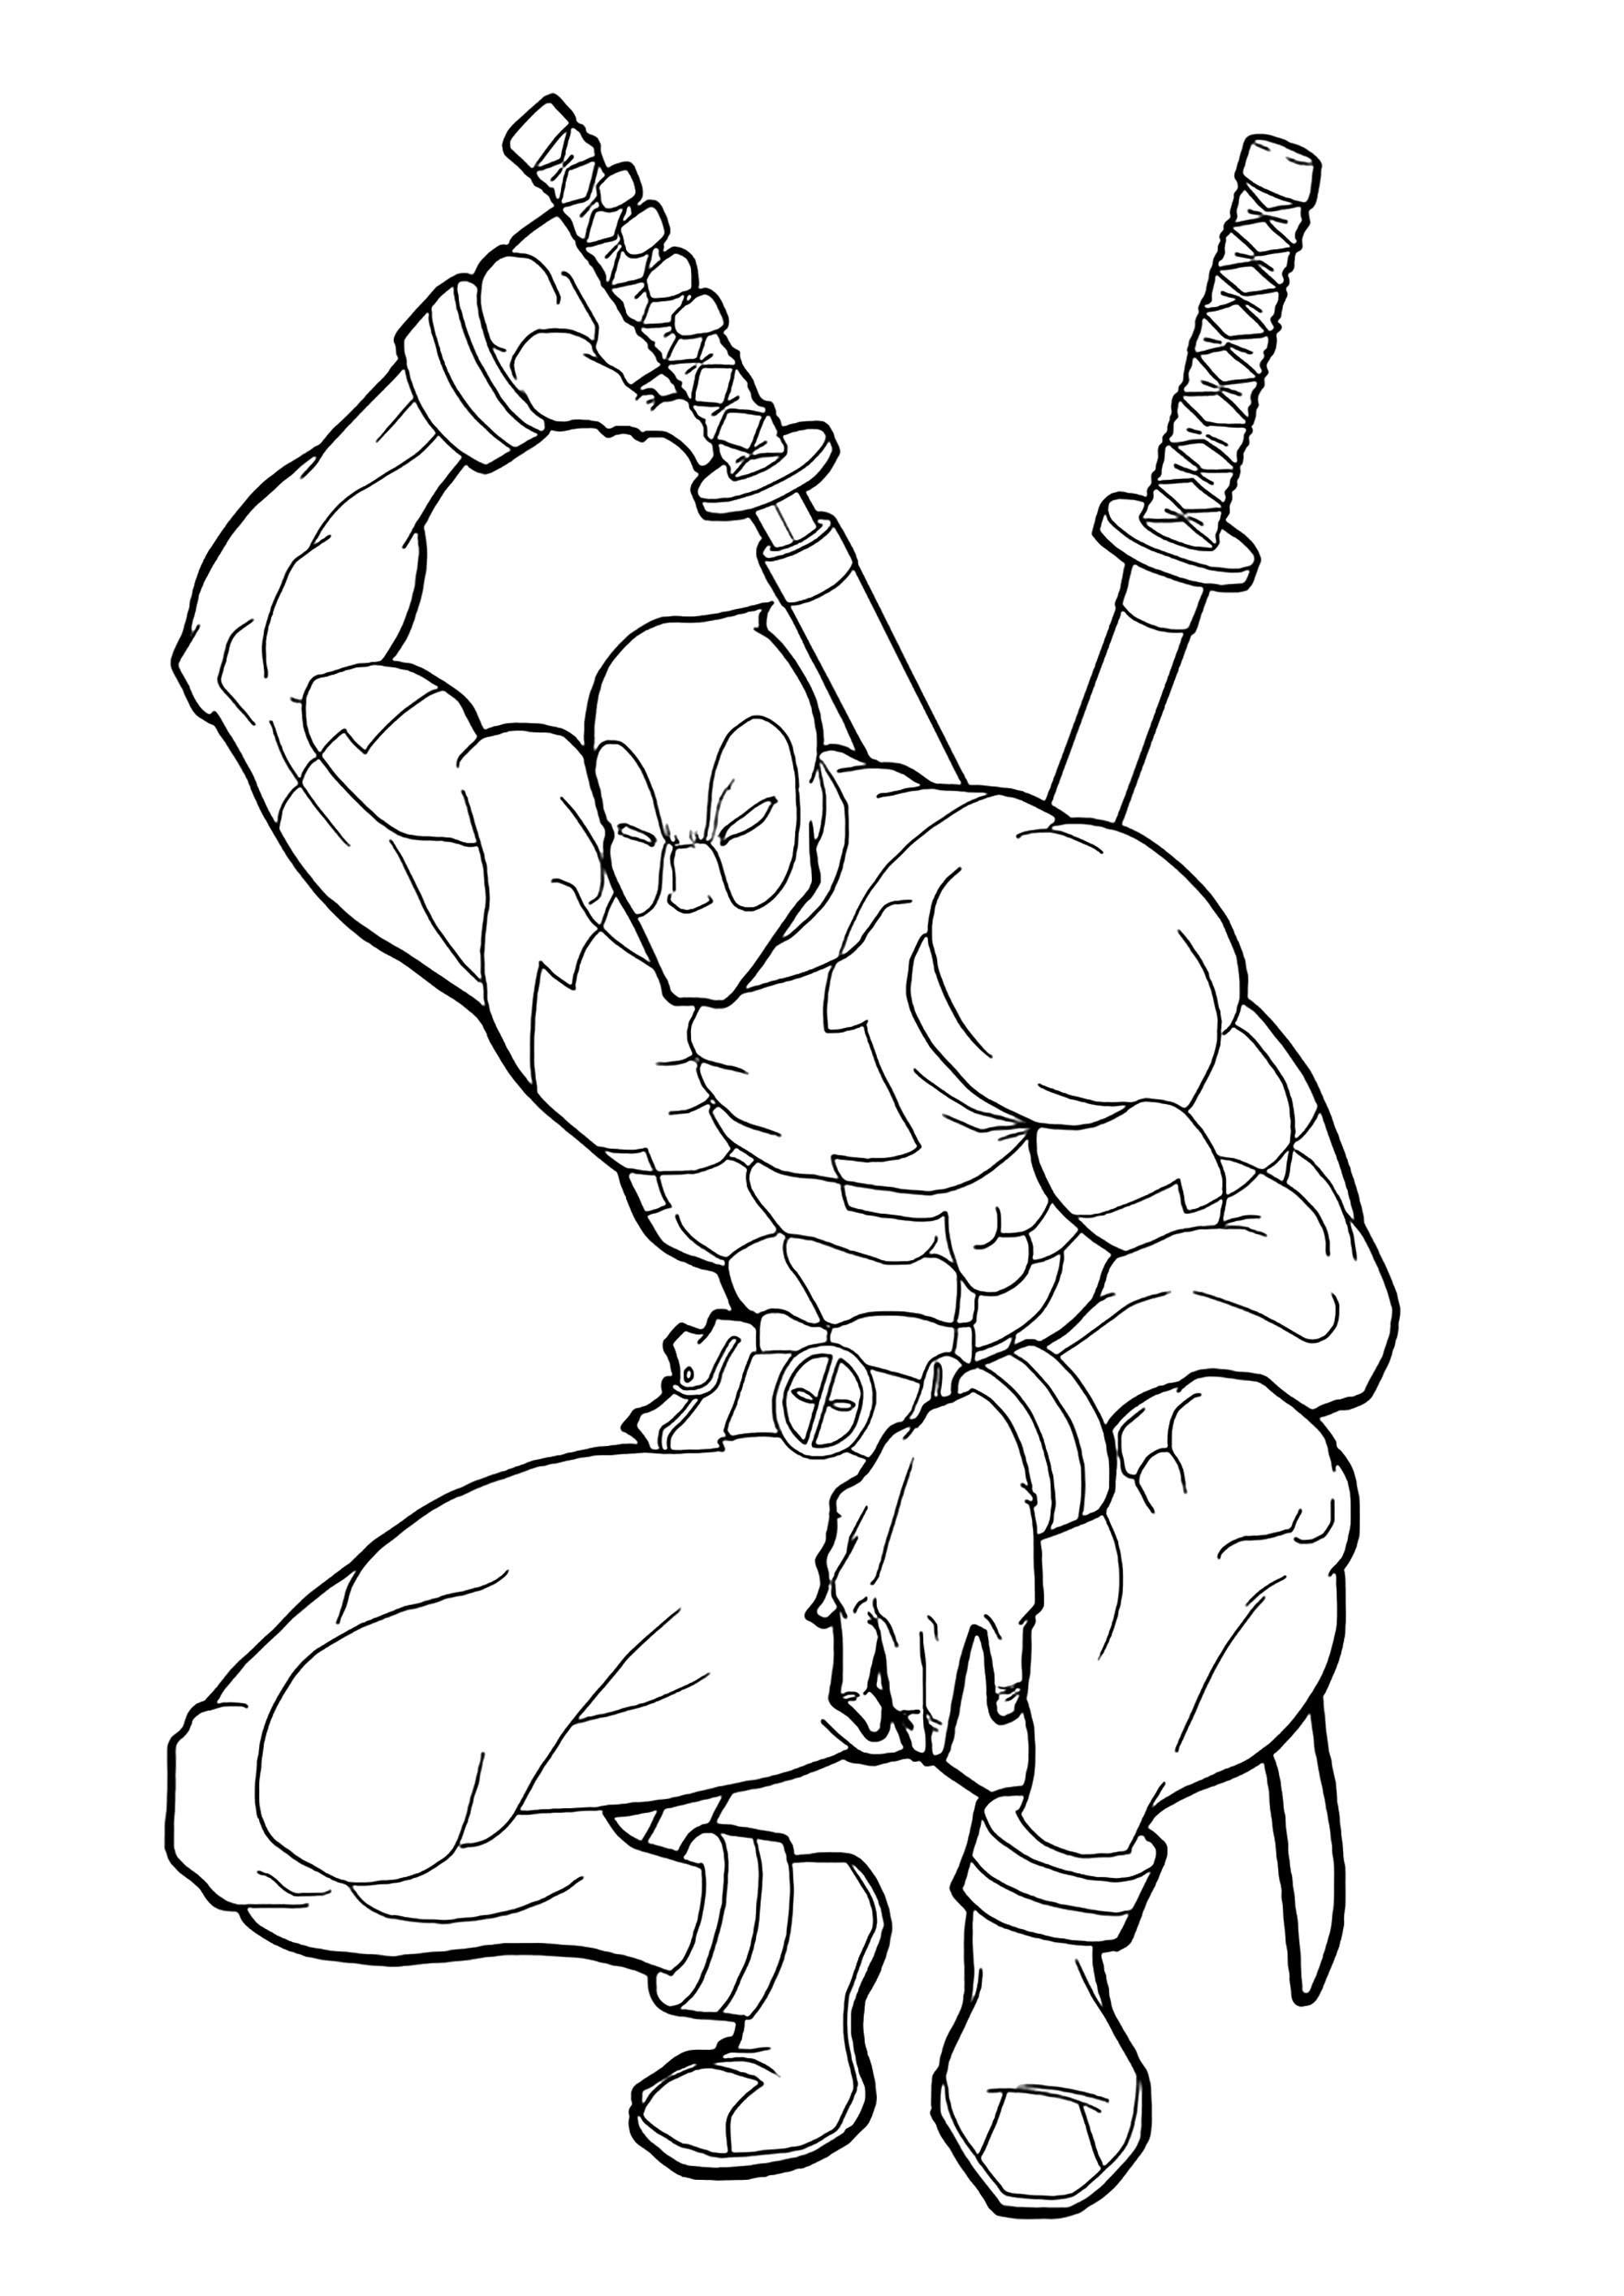 Deadpool coloring page to download for free